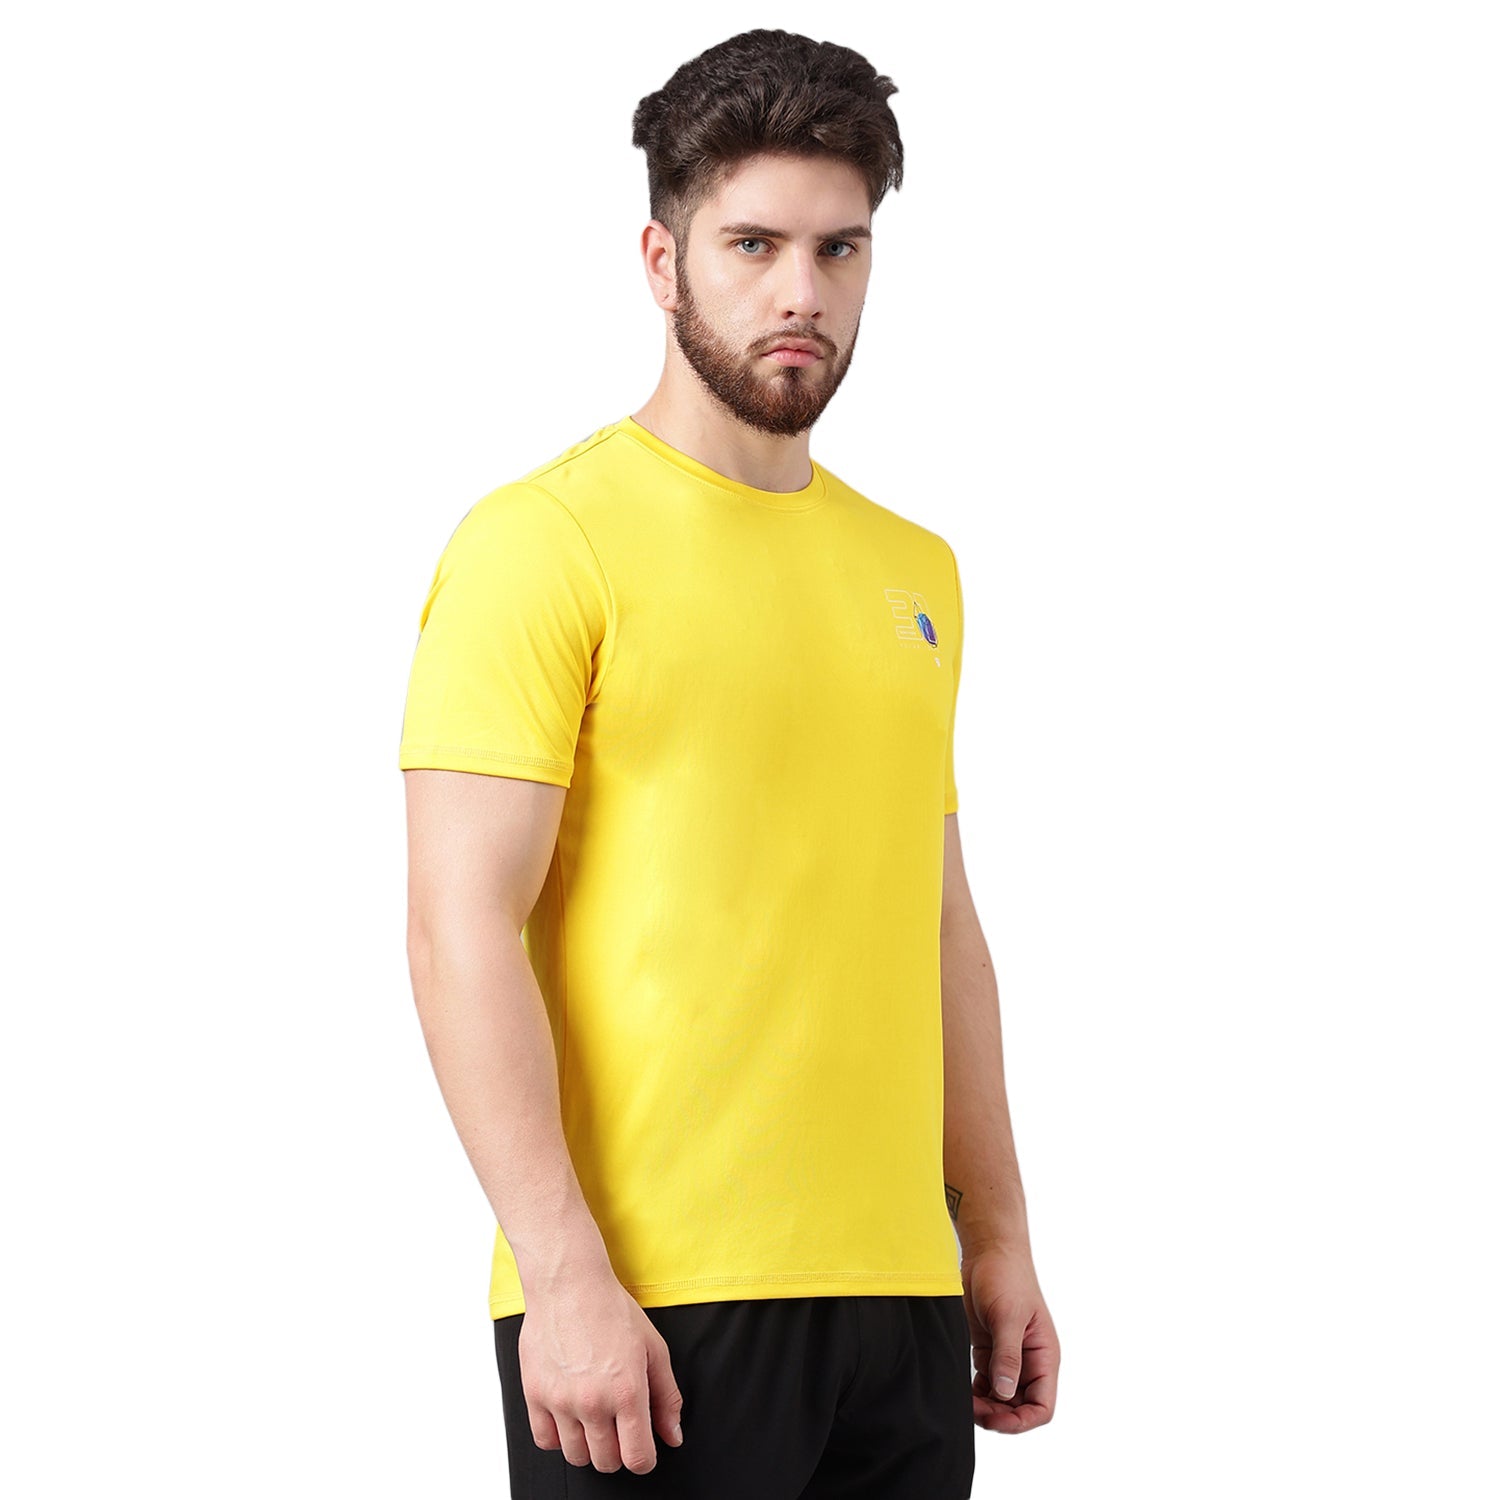 SG UNPAR By SG Mens Round Neck Autumn-Glory Tee | Ideal for Trail Running, Fitness & Training, Jogging, Regular & Fashion Wear